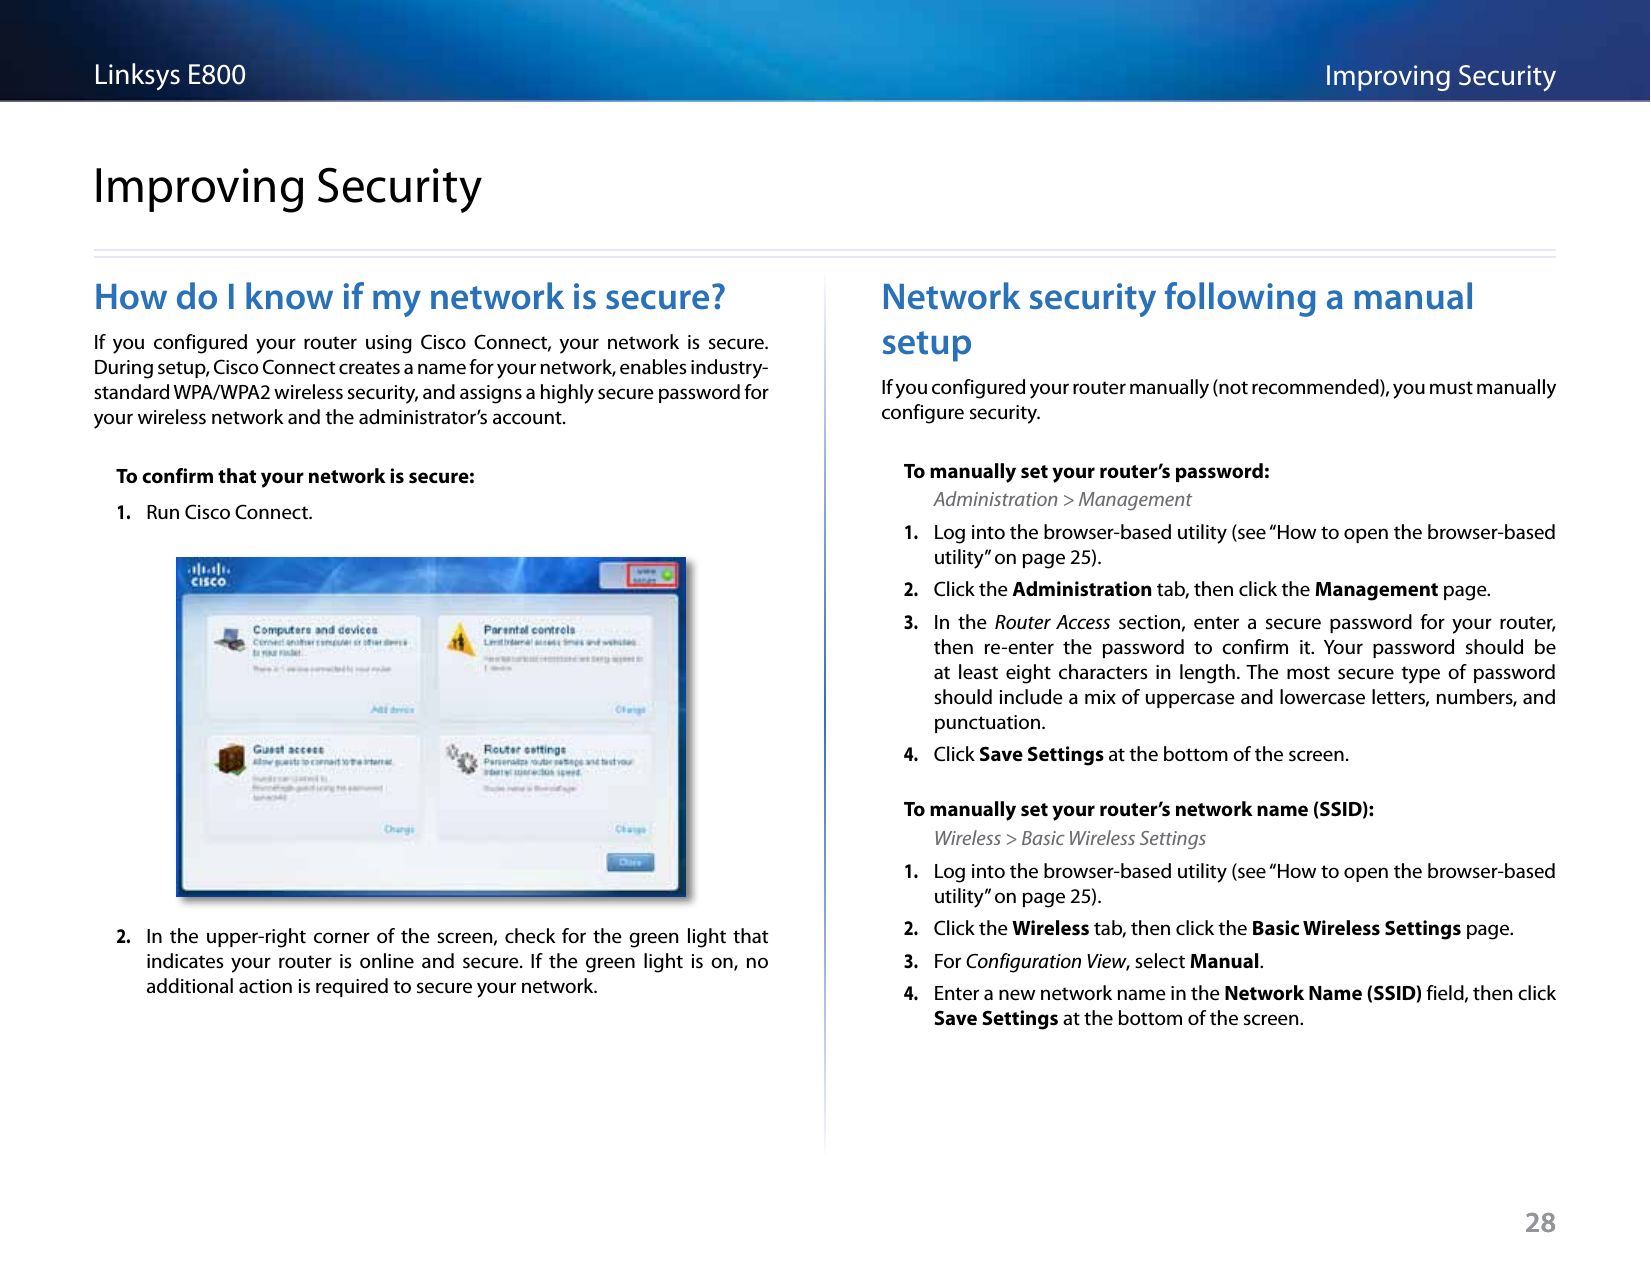 28Improving SecurityLinksys E80028How do I know if my network is secure?If  you  configured  your  router  using  Cisco  Connect,  your  network  is  secure. During setup, Cisco Connect creates a name for your network, enables industry-standard WPA/WPA2 wireless security, and assigns a highly secure password for your wireless network and the administrator’s account.To confirm that your network is secure:1. Run Cisco Connect.2. In  the  upper-right  corner  of  the screen,  check  for  the  green light  that indicates  your  router  is  online  and  secure. If  the  green  light  is  on,  no additional action is required to secure your network.Network security following a manual setupIf you configured your router manually (not recommended), you must manually configure security.To manually set your router’s password:Administration &gt; Management1. Log into the browser-based utility (see “How to open the browser-based utility” on page 25). 2. Click the Administration tab, then click the Management page.3. In  the  Router  Access  section,  enter  a  secure  password  for  your  router, then  re-enter  the  password  to  confirm  it.  Your  password  should  be at  least  eight  characters  in  length. The  most  secure  type  of  password should include a mix of uppercase and lowercase letters, numbers, and punctuation.4. Click Save Settings at the bottom of the screen.To manually set your router’s network name (SSID):Wireless &gt; Basic Wireless Settings1. Log into the browser-based utility (see “How to open the browser-based utility” on page 25). 2. Click the Wireless tab, then click the Basic Wireless Settings page.3. For Configuration View, select Manual. 4. Enter a new network name in the Network Name (SSID) field, then click Save Settings at the bottom of the screen. Improving Security